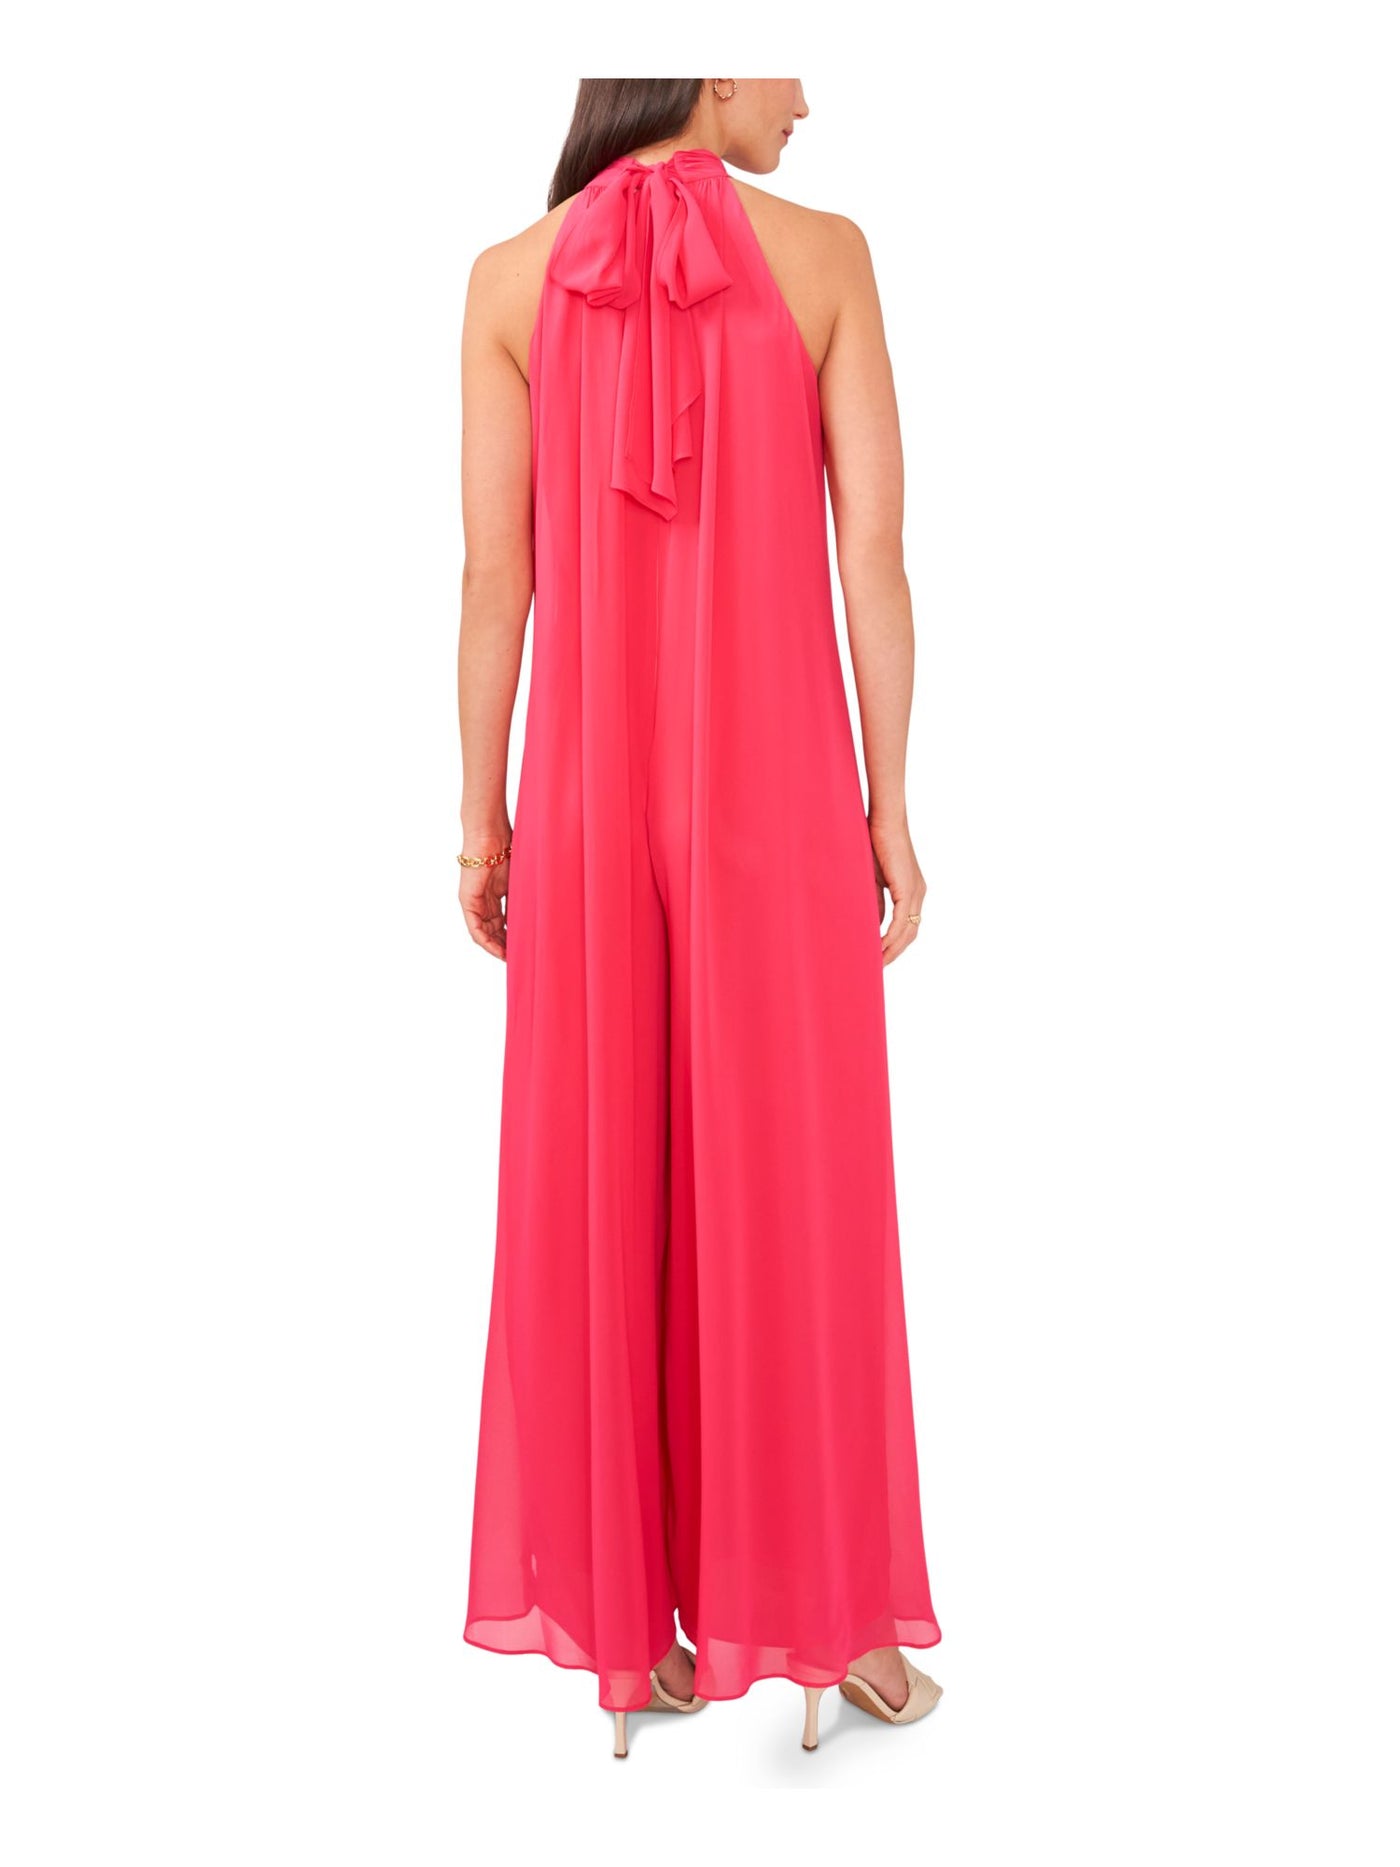 VINCE CAMUTO Womens Pink Zippered Tie Lined Sheer Sleeveless Halter Evening Wide Leg Jumpsuit S